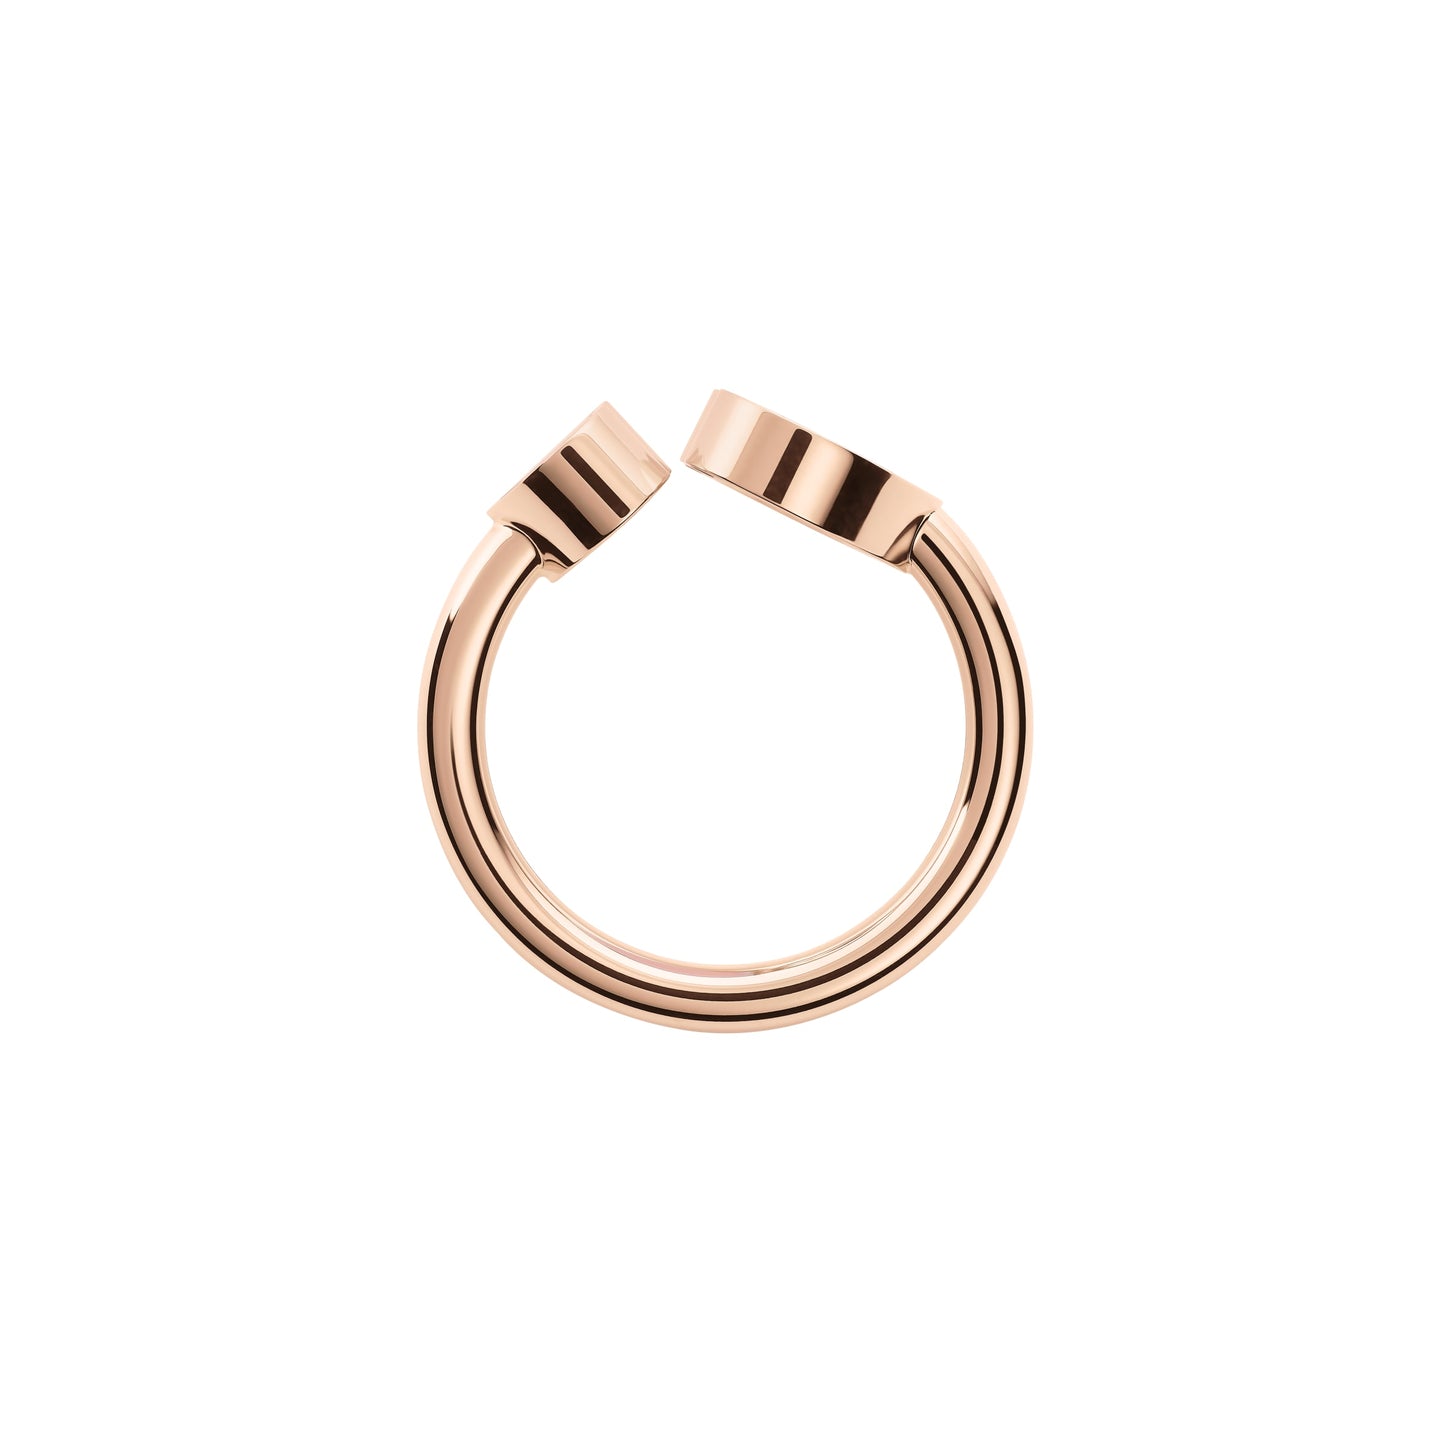 HAPPY HEARTS RINGS, ETHICAL ROSE GOLD, DIAMOND, PINK OPAL 829482-5620